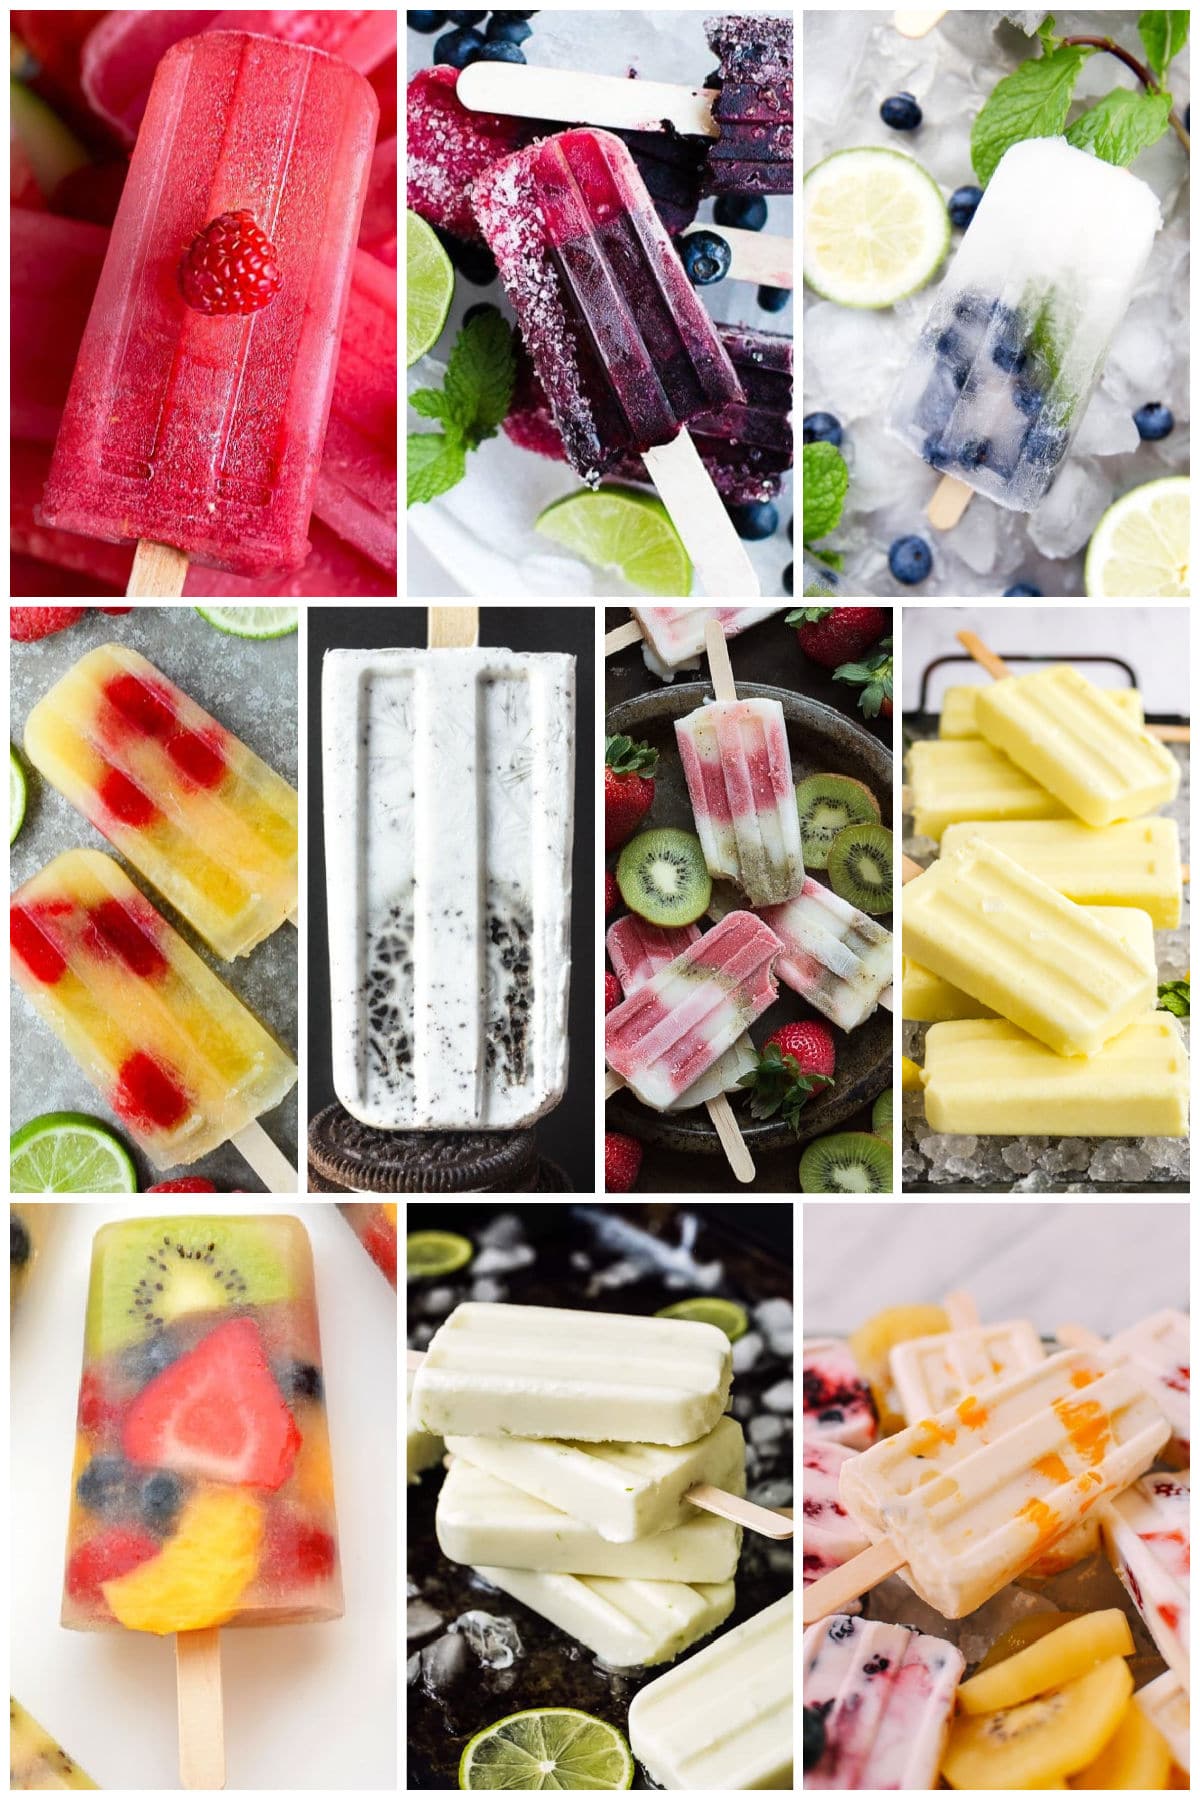 A group of popsicle recipes like Dole Whip and key lime popsicles.